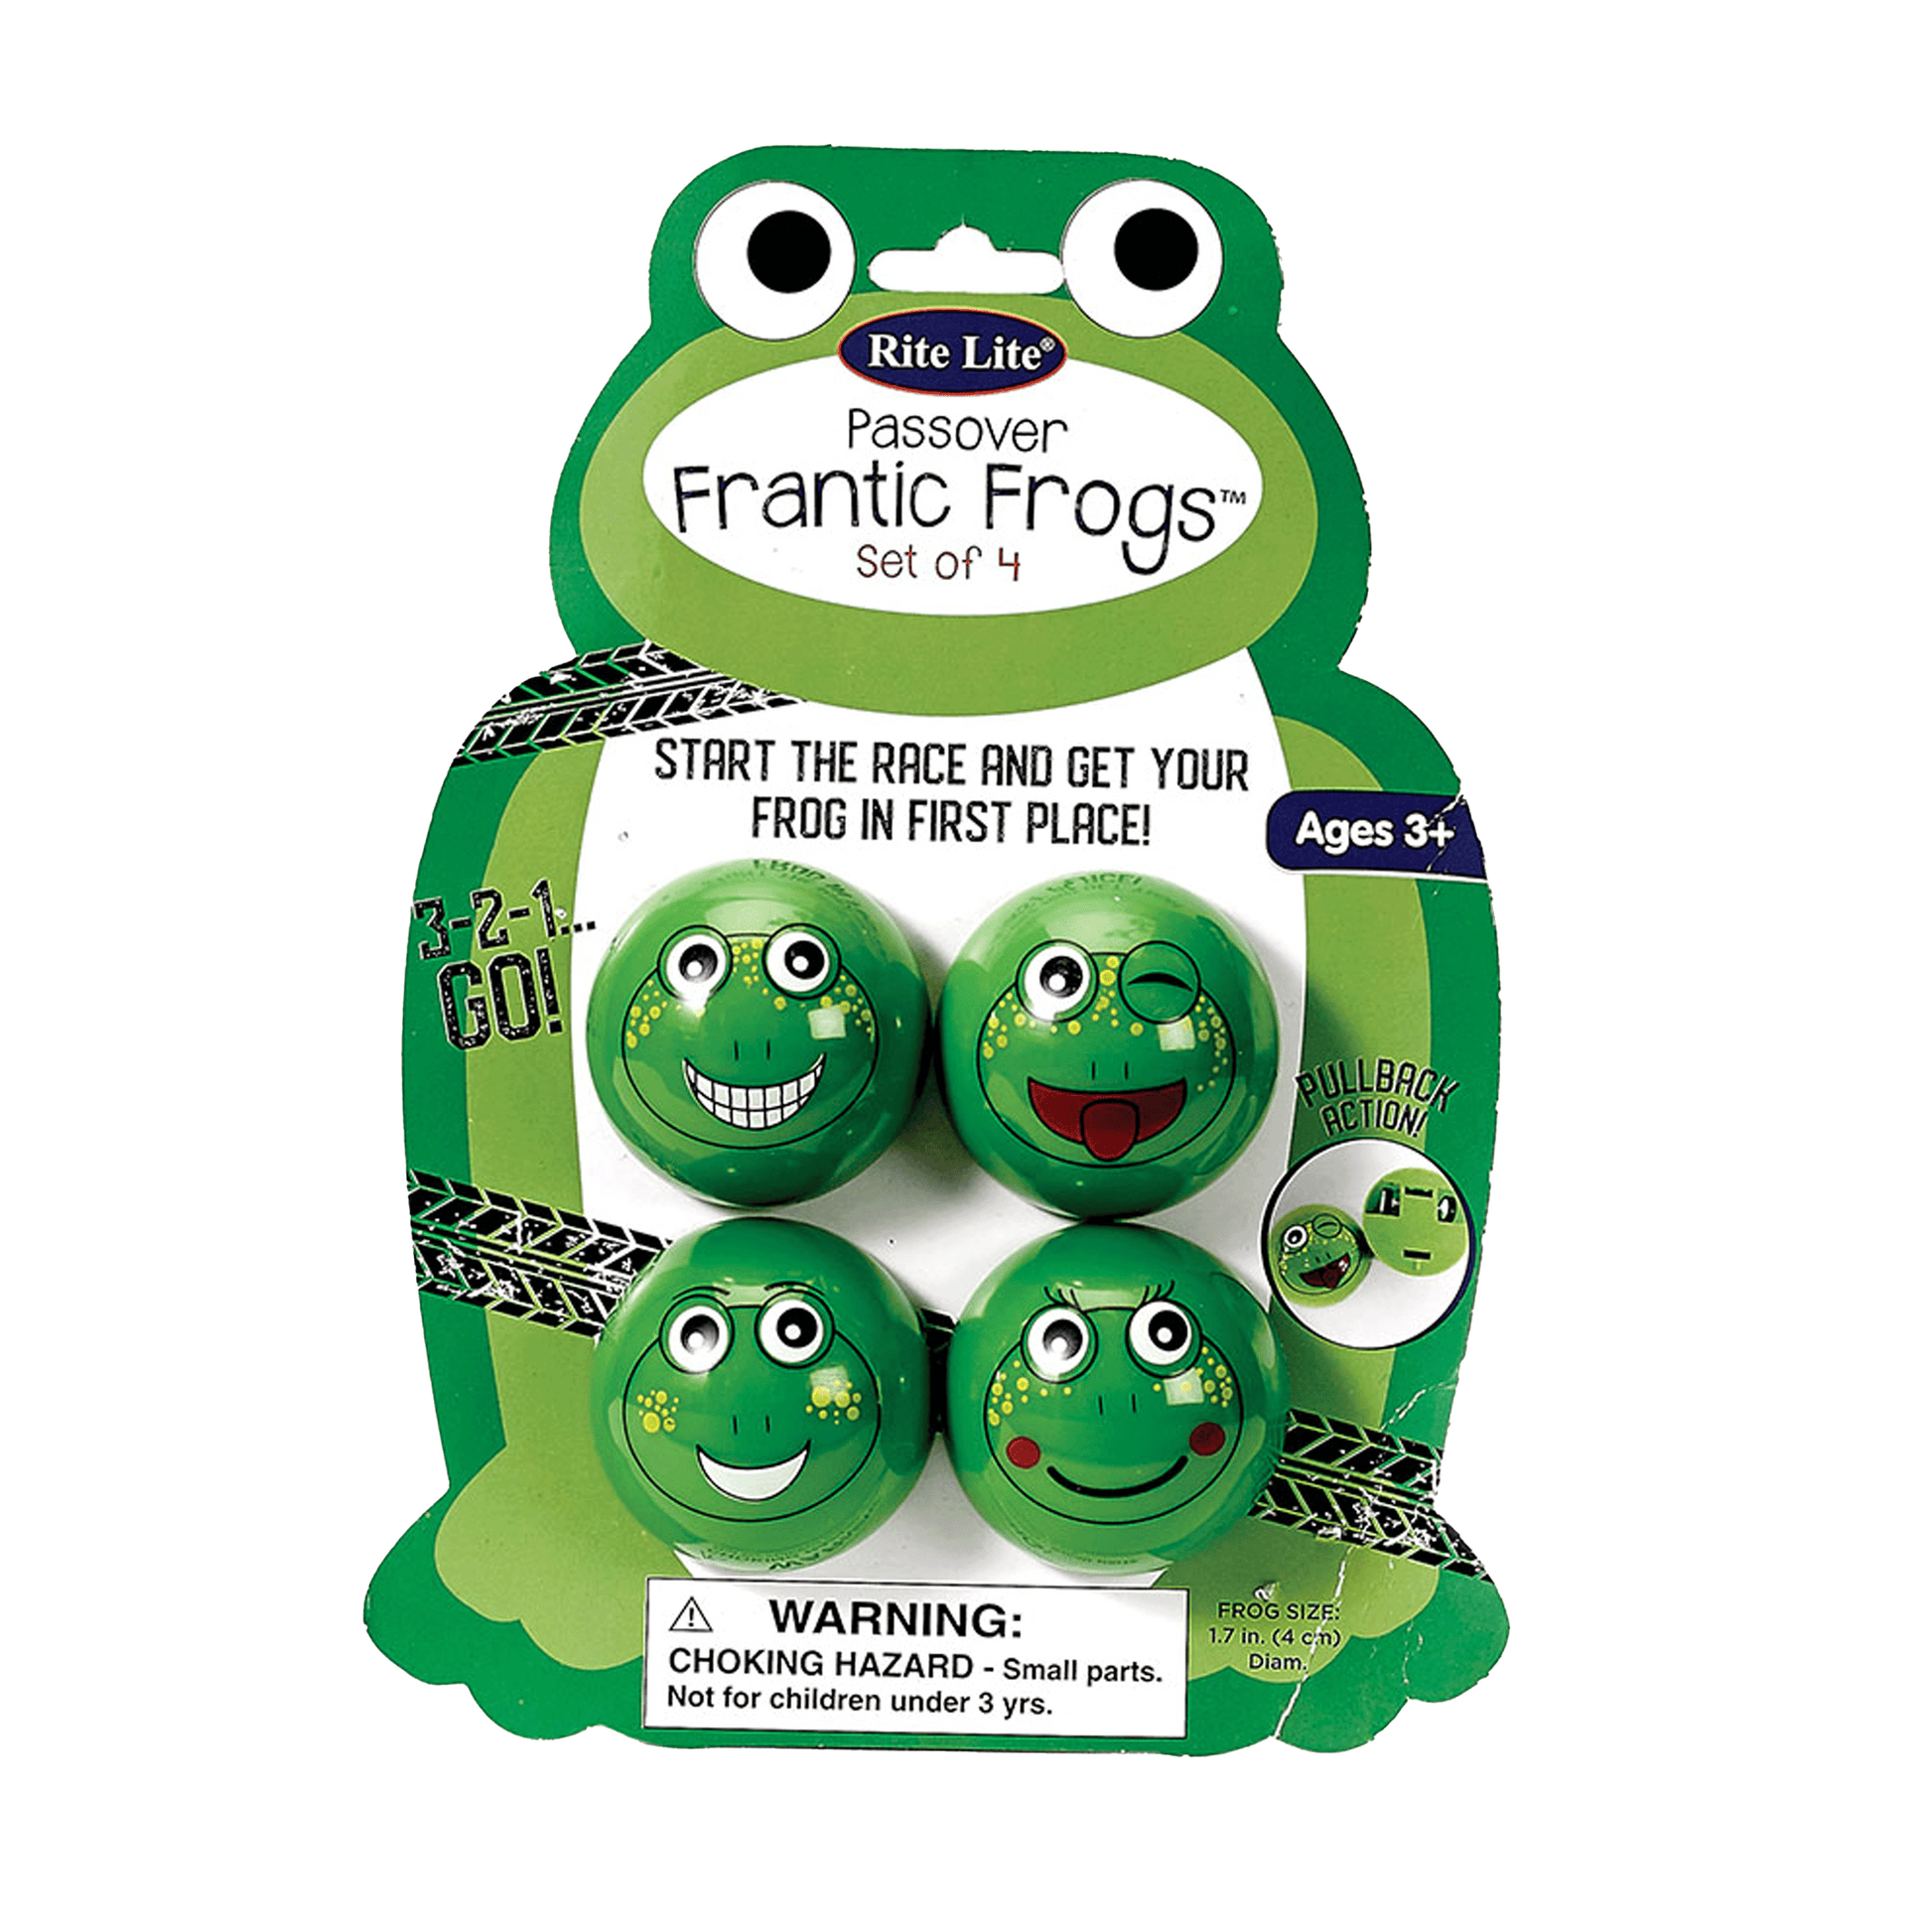 Rite Lite passover franitc frog toy with four frogs making similing faces 